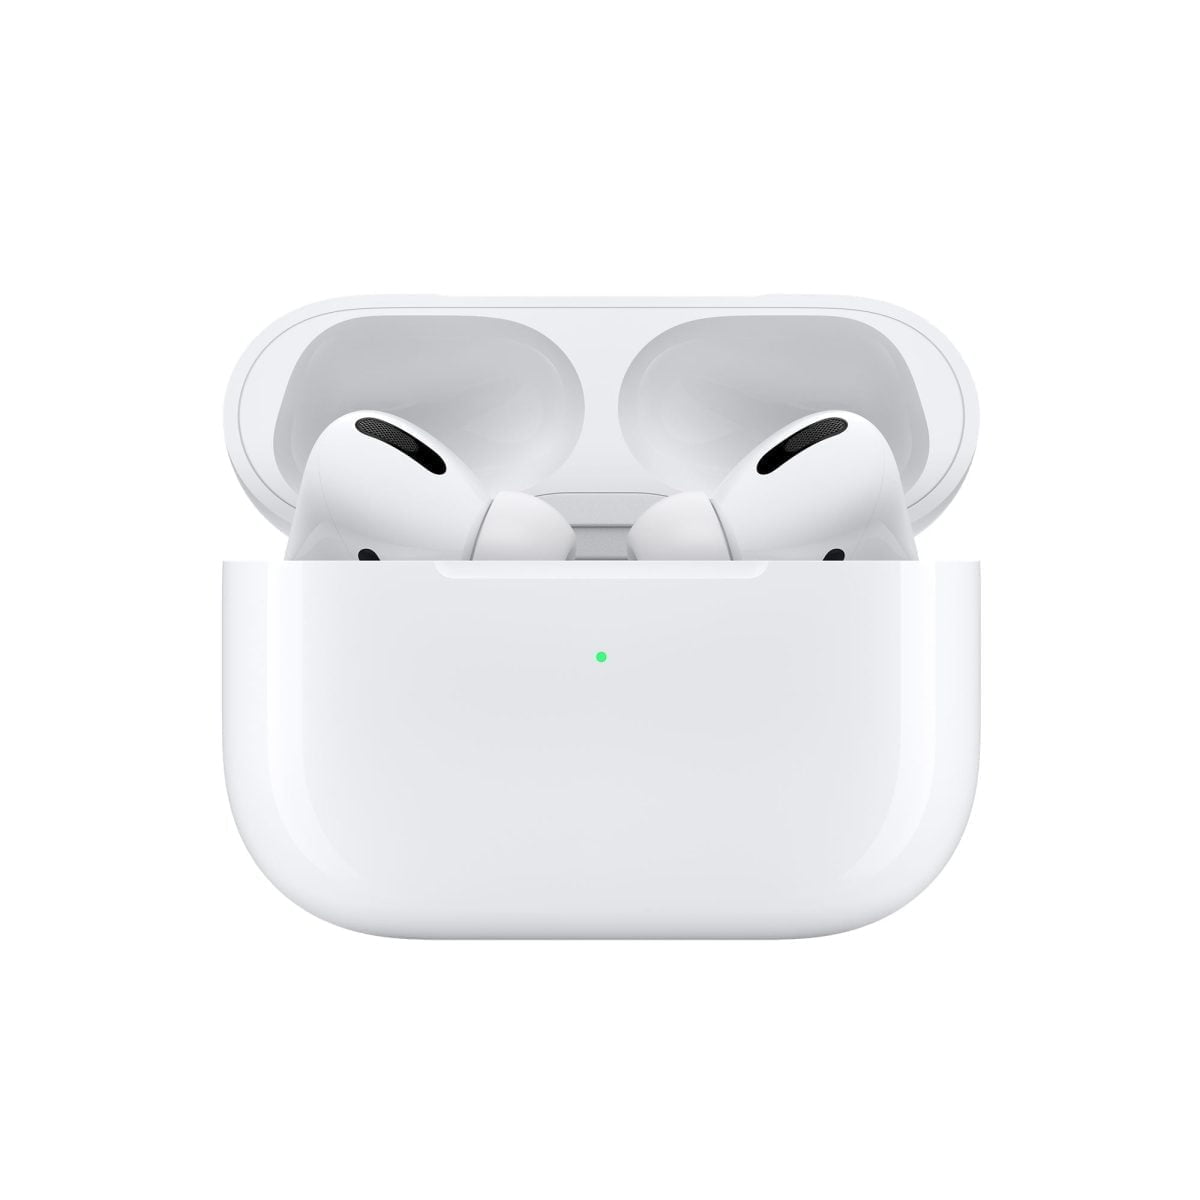 Mwp22 Av2 Apple &Lt;Div Class=&Quot;Rc-Pdsection-Sidepanel Column Large-3 Small-12&Quot;&Gt; &Lt;H1&Gt;Apple Airpods Pro (With Magsafe Charging Case) - White&Lt;/H1&Gt; &Lt;/Div&Gt; &Lt;Div Class=&Quot;Rc-Pdsection-Mainpanel Column Large-9 Small-12&Quot;&Gt; &Lt;H4 Class=&Quot;H4-Para-Title&Quot;&Gt;Magic Like You’ve Never Heard&Lt;/H4&Gt; &Lt;Div Class=&Quot;Para-List As-Pdp-Lastparalist&Quot;&Gt; Airpods Pro Have Been Designed To Deliver Active Noise Cancellation For Immersive Sound, Transparency Mode So You Can Hear Your Surroundings, And A Customizable Fit For All-Day Comfort. Just Like Airpods, Airpods Pro Connect Magically To Your Apple Devices. And They’re Ready To Use Right Out Of The Case. &Lt;/Div&Gt; &Lt;/Div&Gt; Airpods Pro Apple Airpods Pro (With Magsafe Charging Case) - White Mlwk3